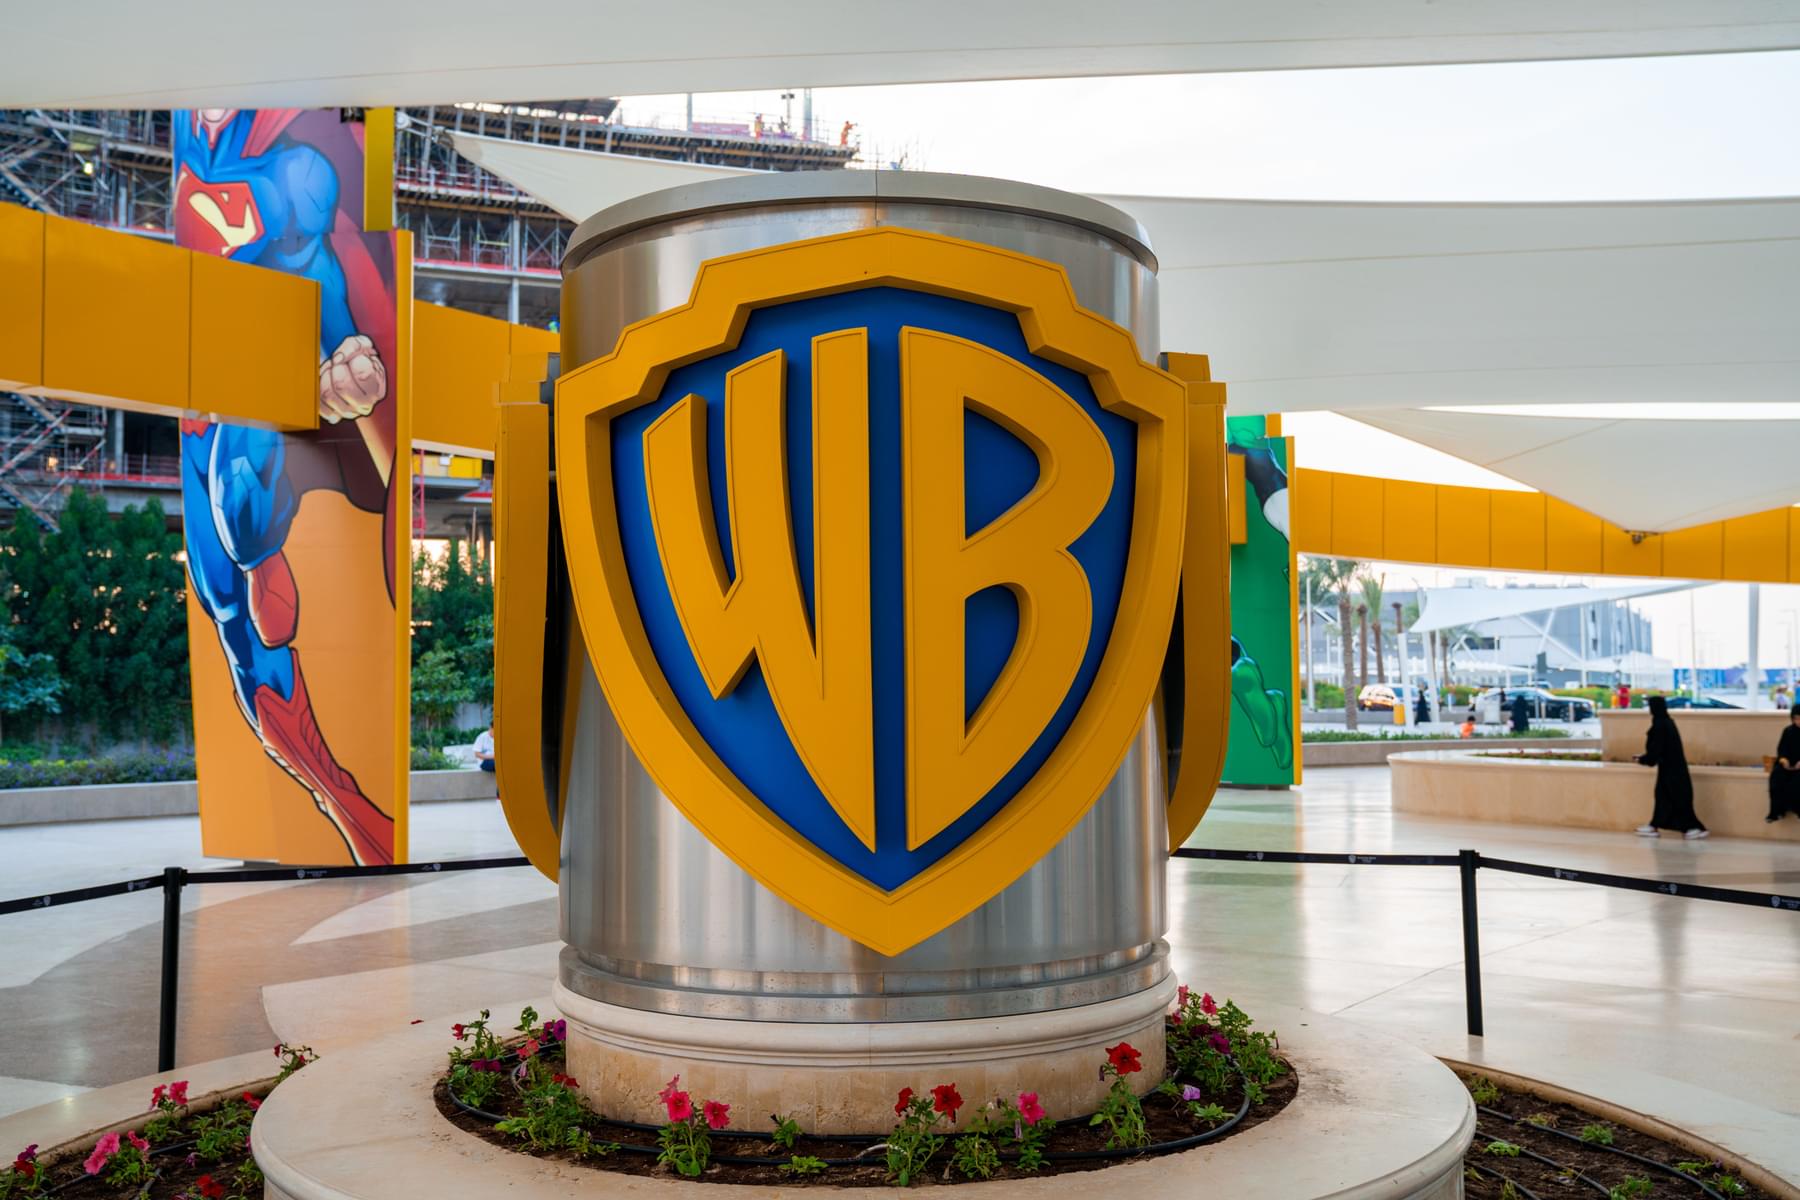 Spend a Day at Warner Bros World